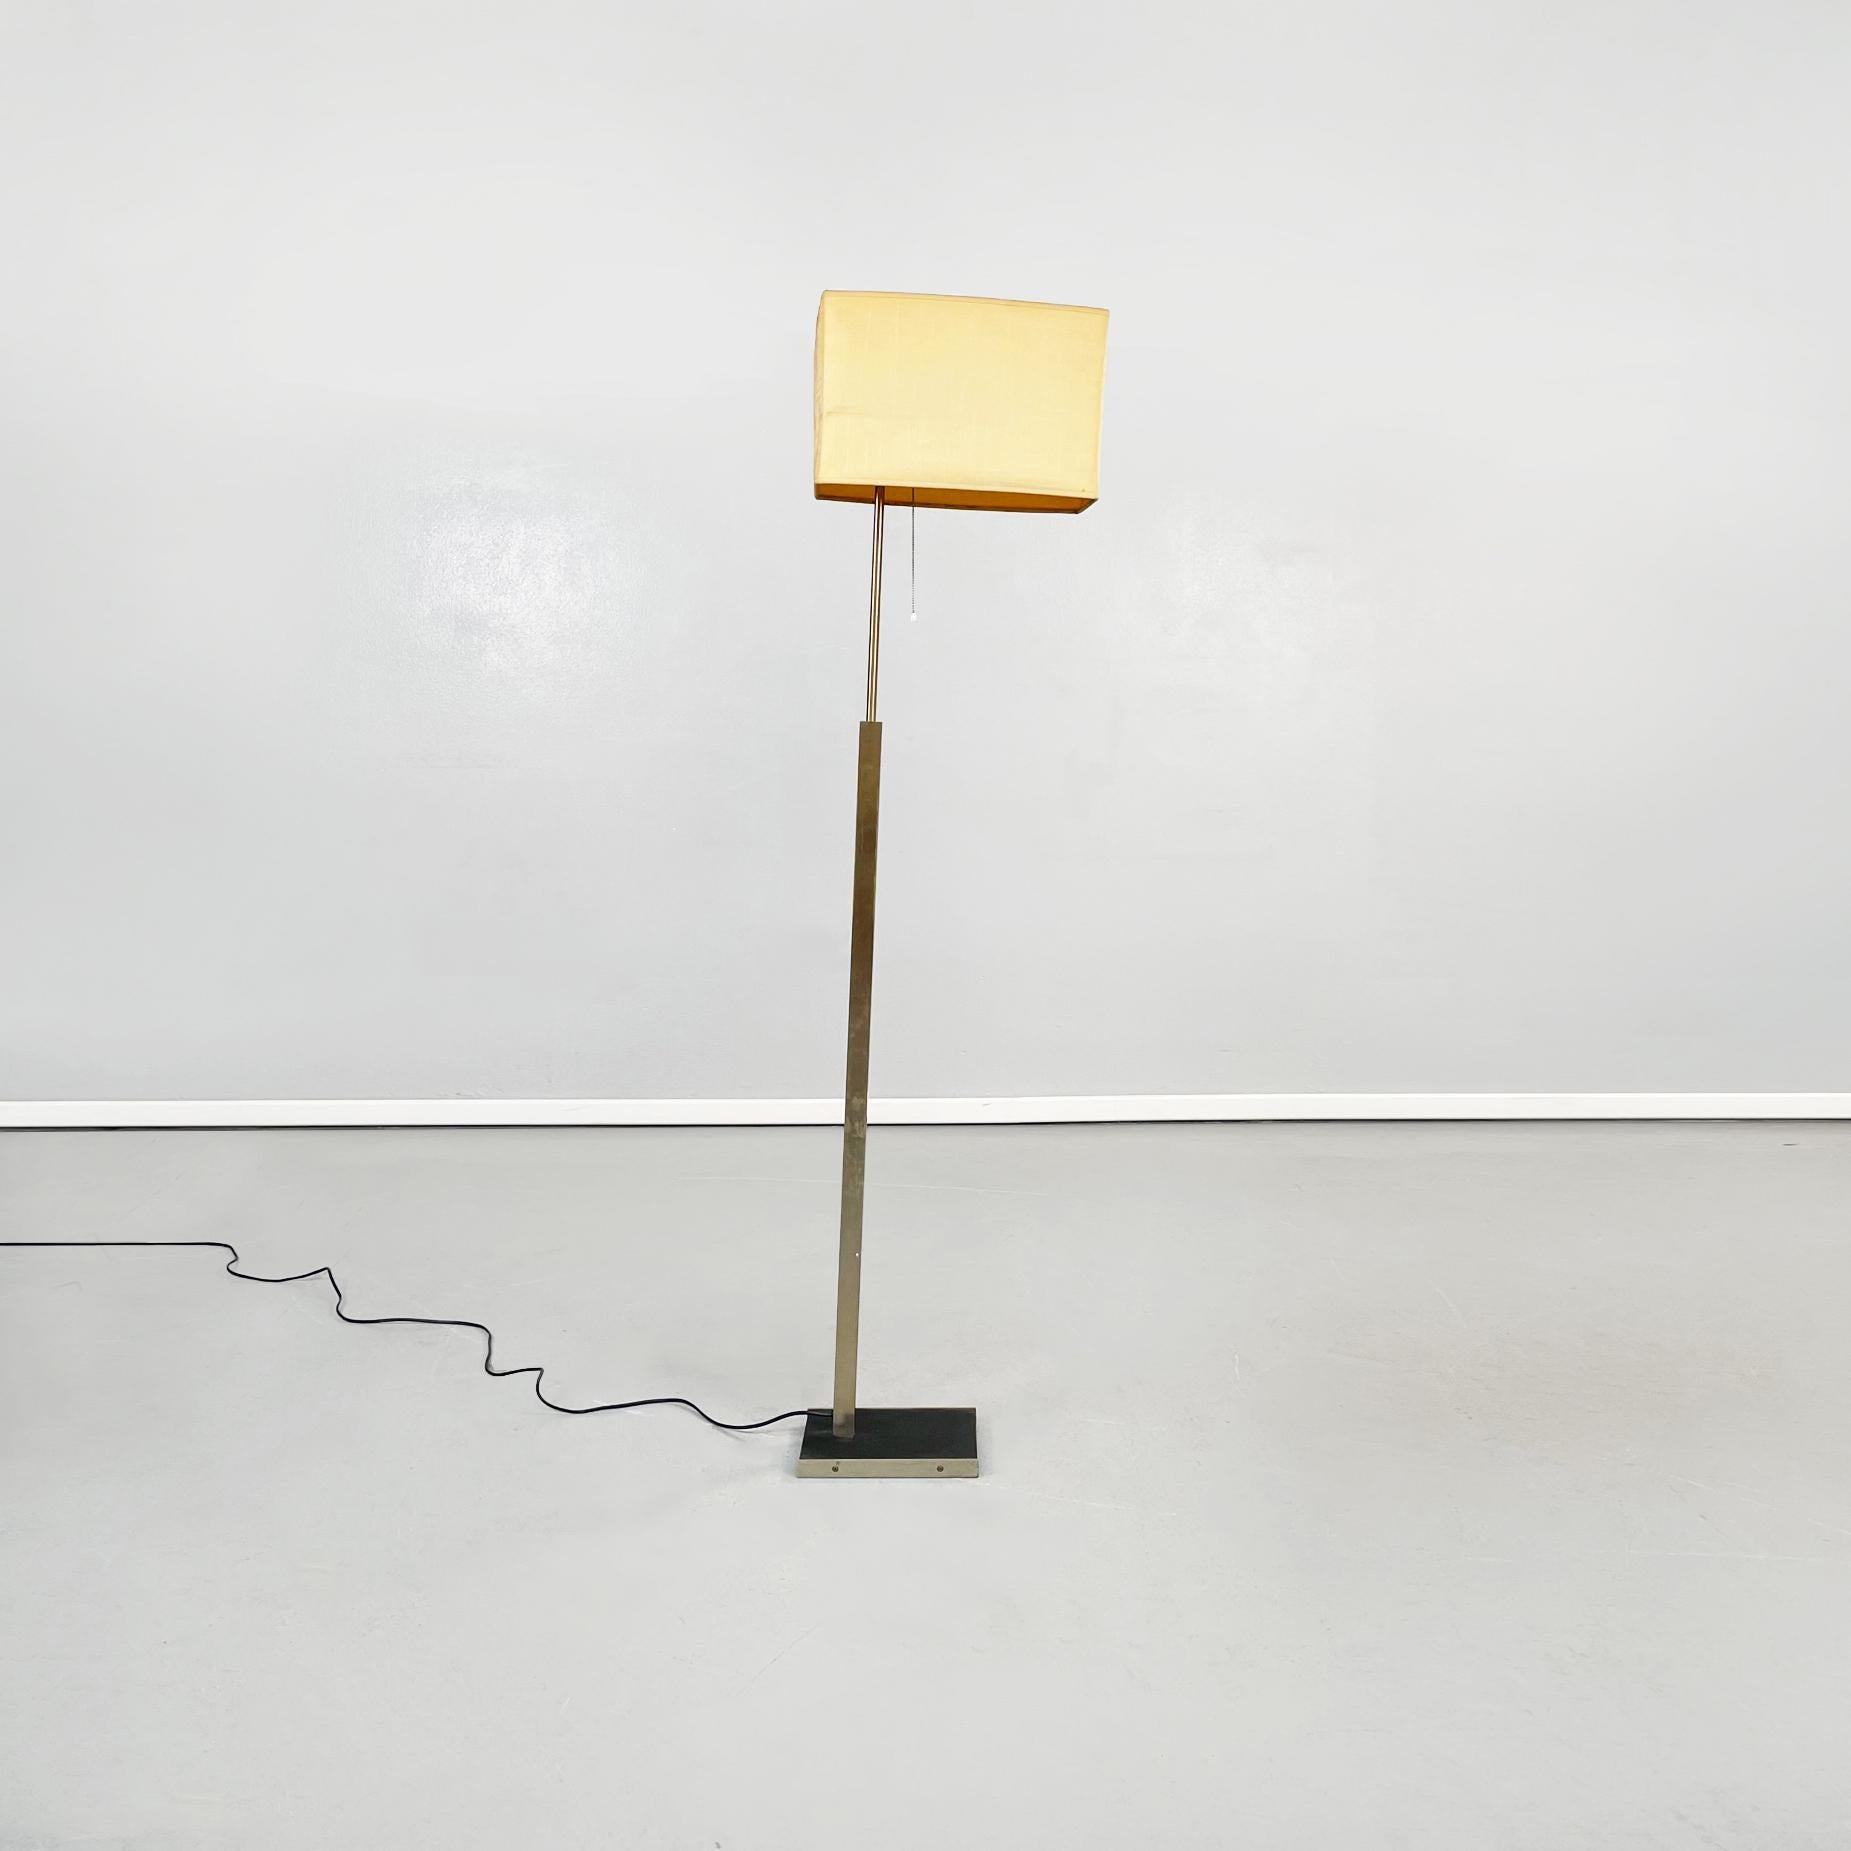 Italian mid-century floor lamp in fabric, leather and brass by Stilnovo, 1970s
Floor lamp with rounded rectangular lampshade, in yellow fabric. The lamp is turned on with a string, present near the bulb. The central structure is composed of a brass